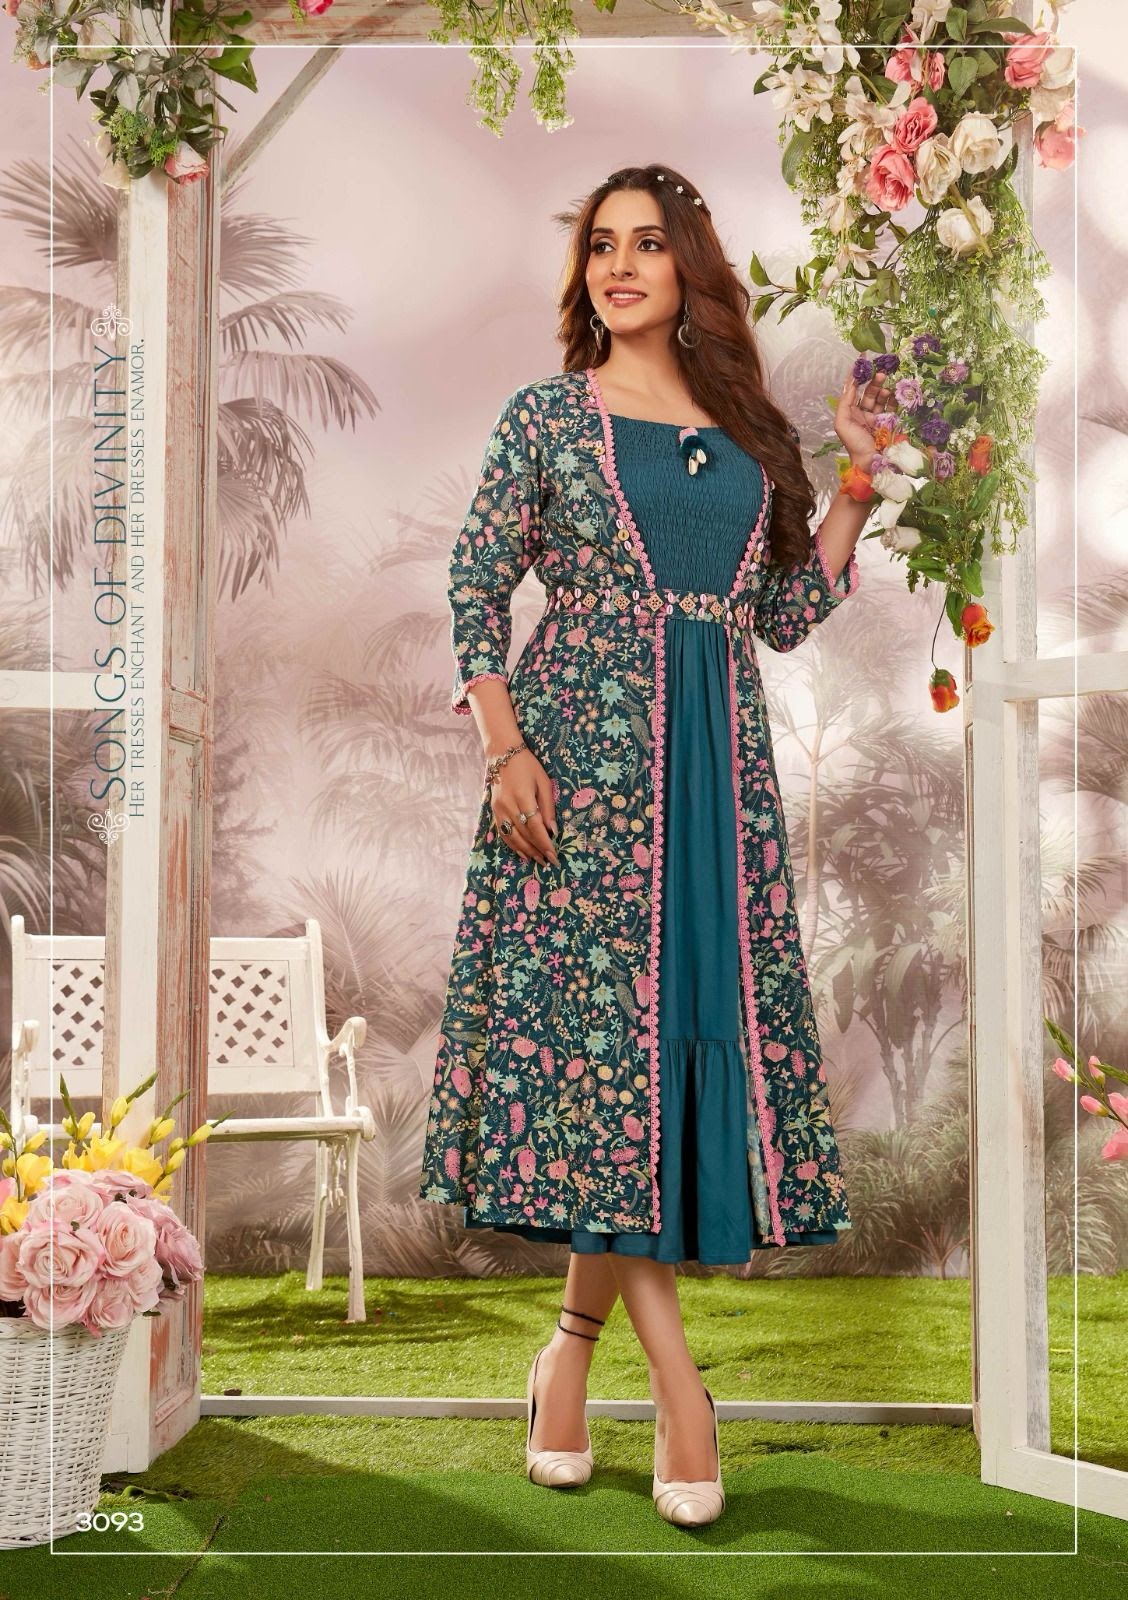 Jaipur Kurti Women Maroon & Beige Printed A-Line Midi Dress Price in India,  Full Specifications & Offers | DTashion.com